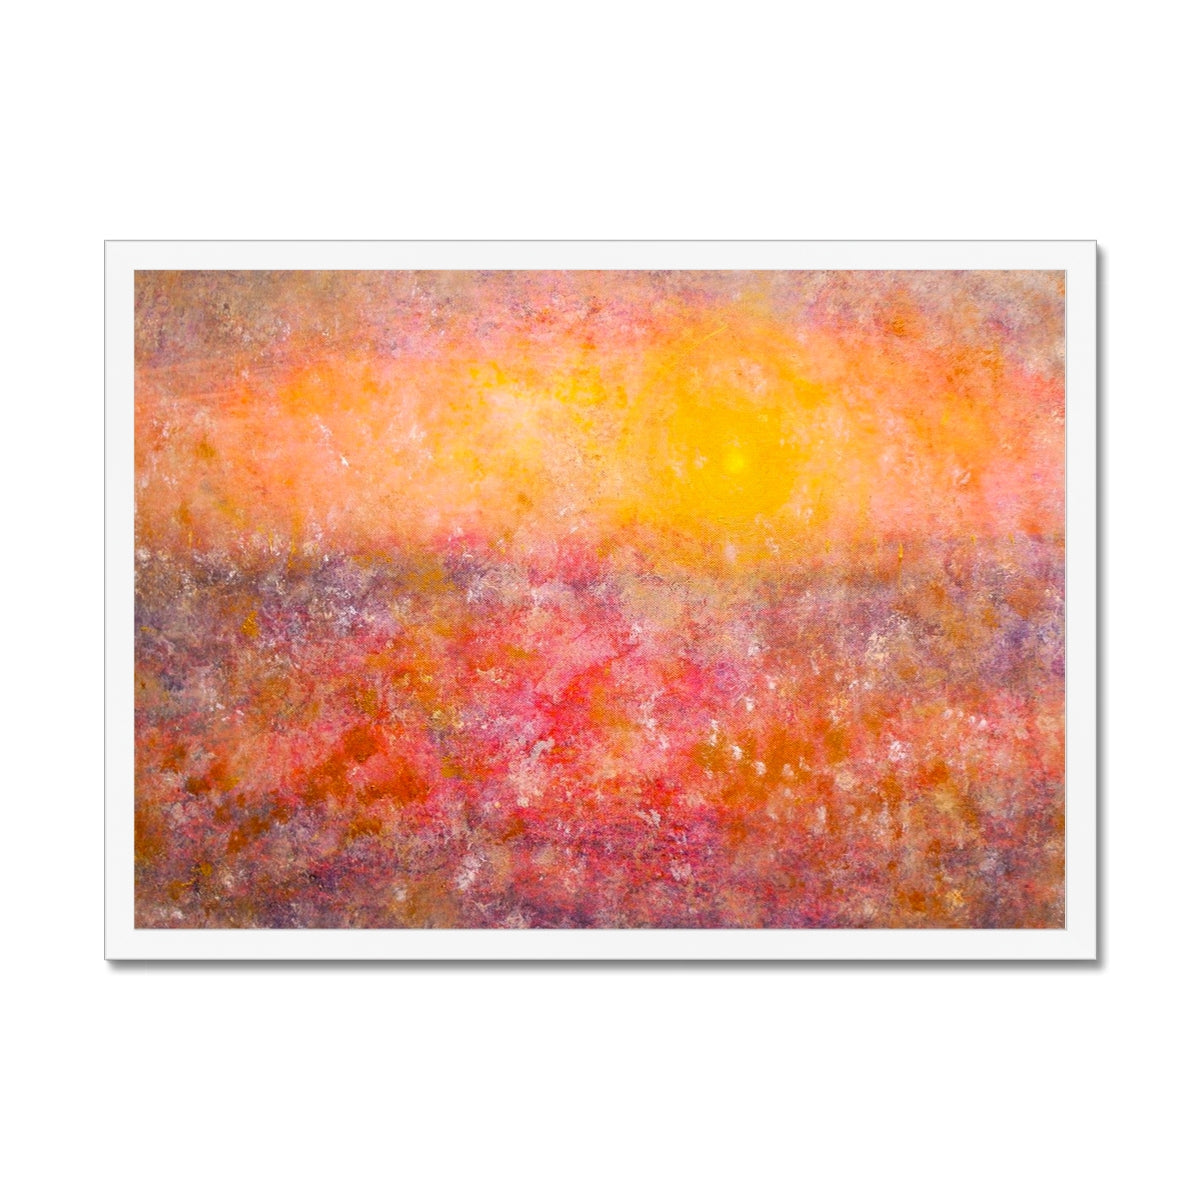 Sunrise Mist Horizon Abstract Painting | Framed Prints From Scotland-Framed Prints-Abstract & Impressionistic Art Gallery-A2 Landscape-White Frame-Paintings, Prints, Homeware, Art Gifts From Scotland By Scottish Artist Kevin Hunter